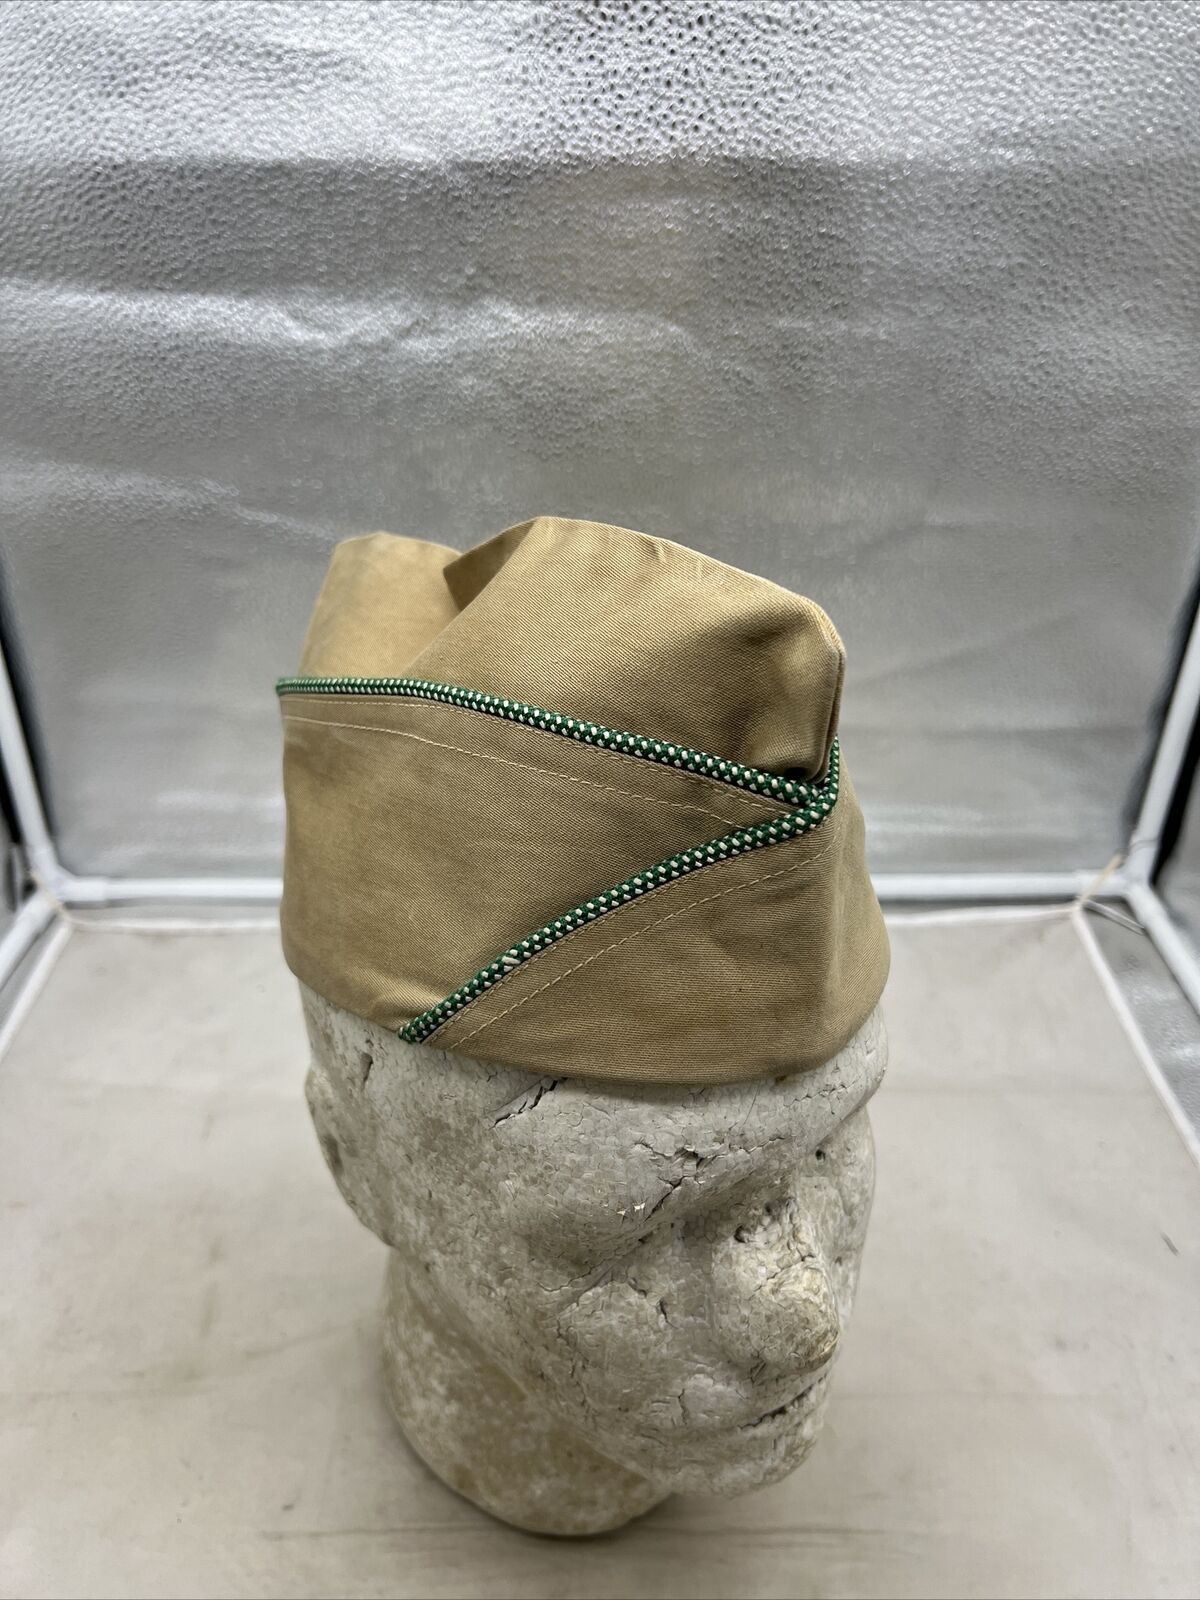 WW2 US Army Armored Piped Khaki Overseas Cap (R495